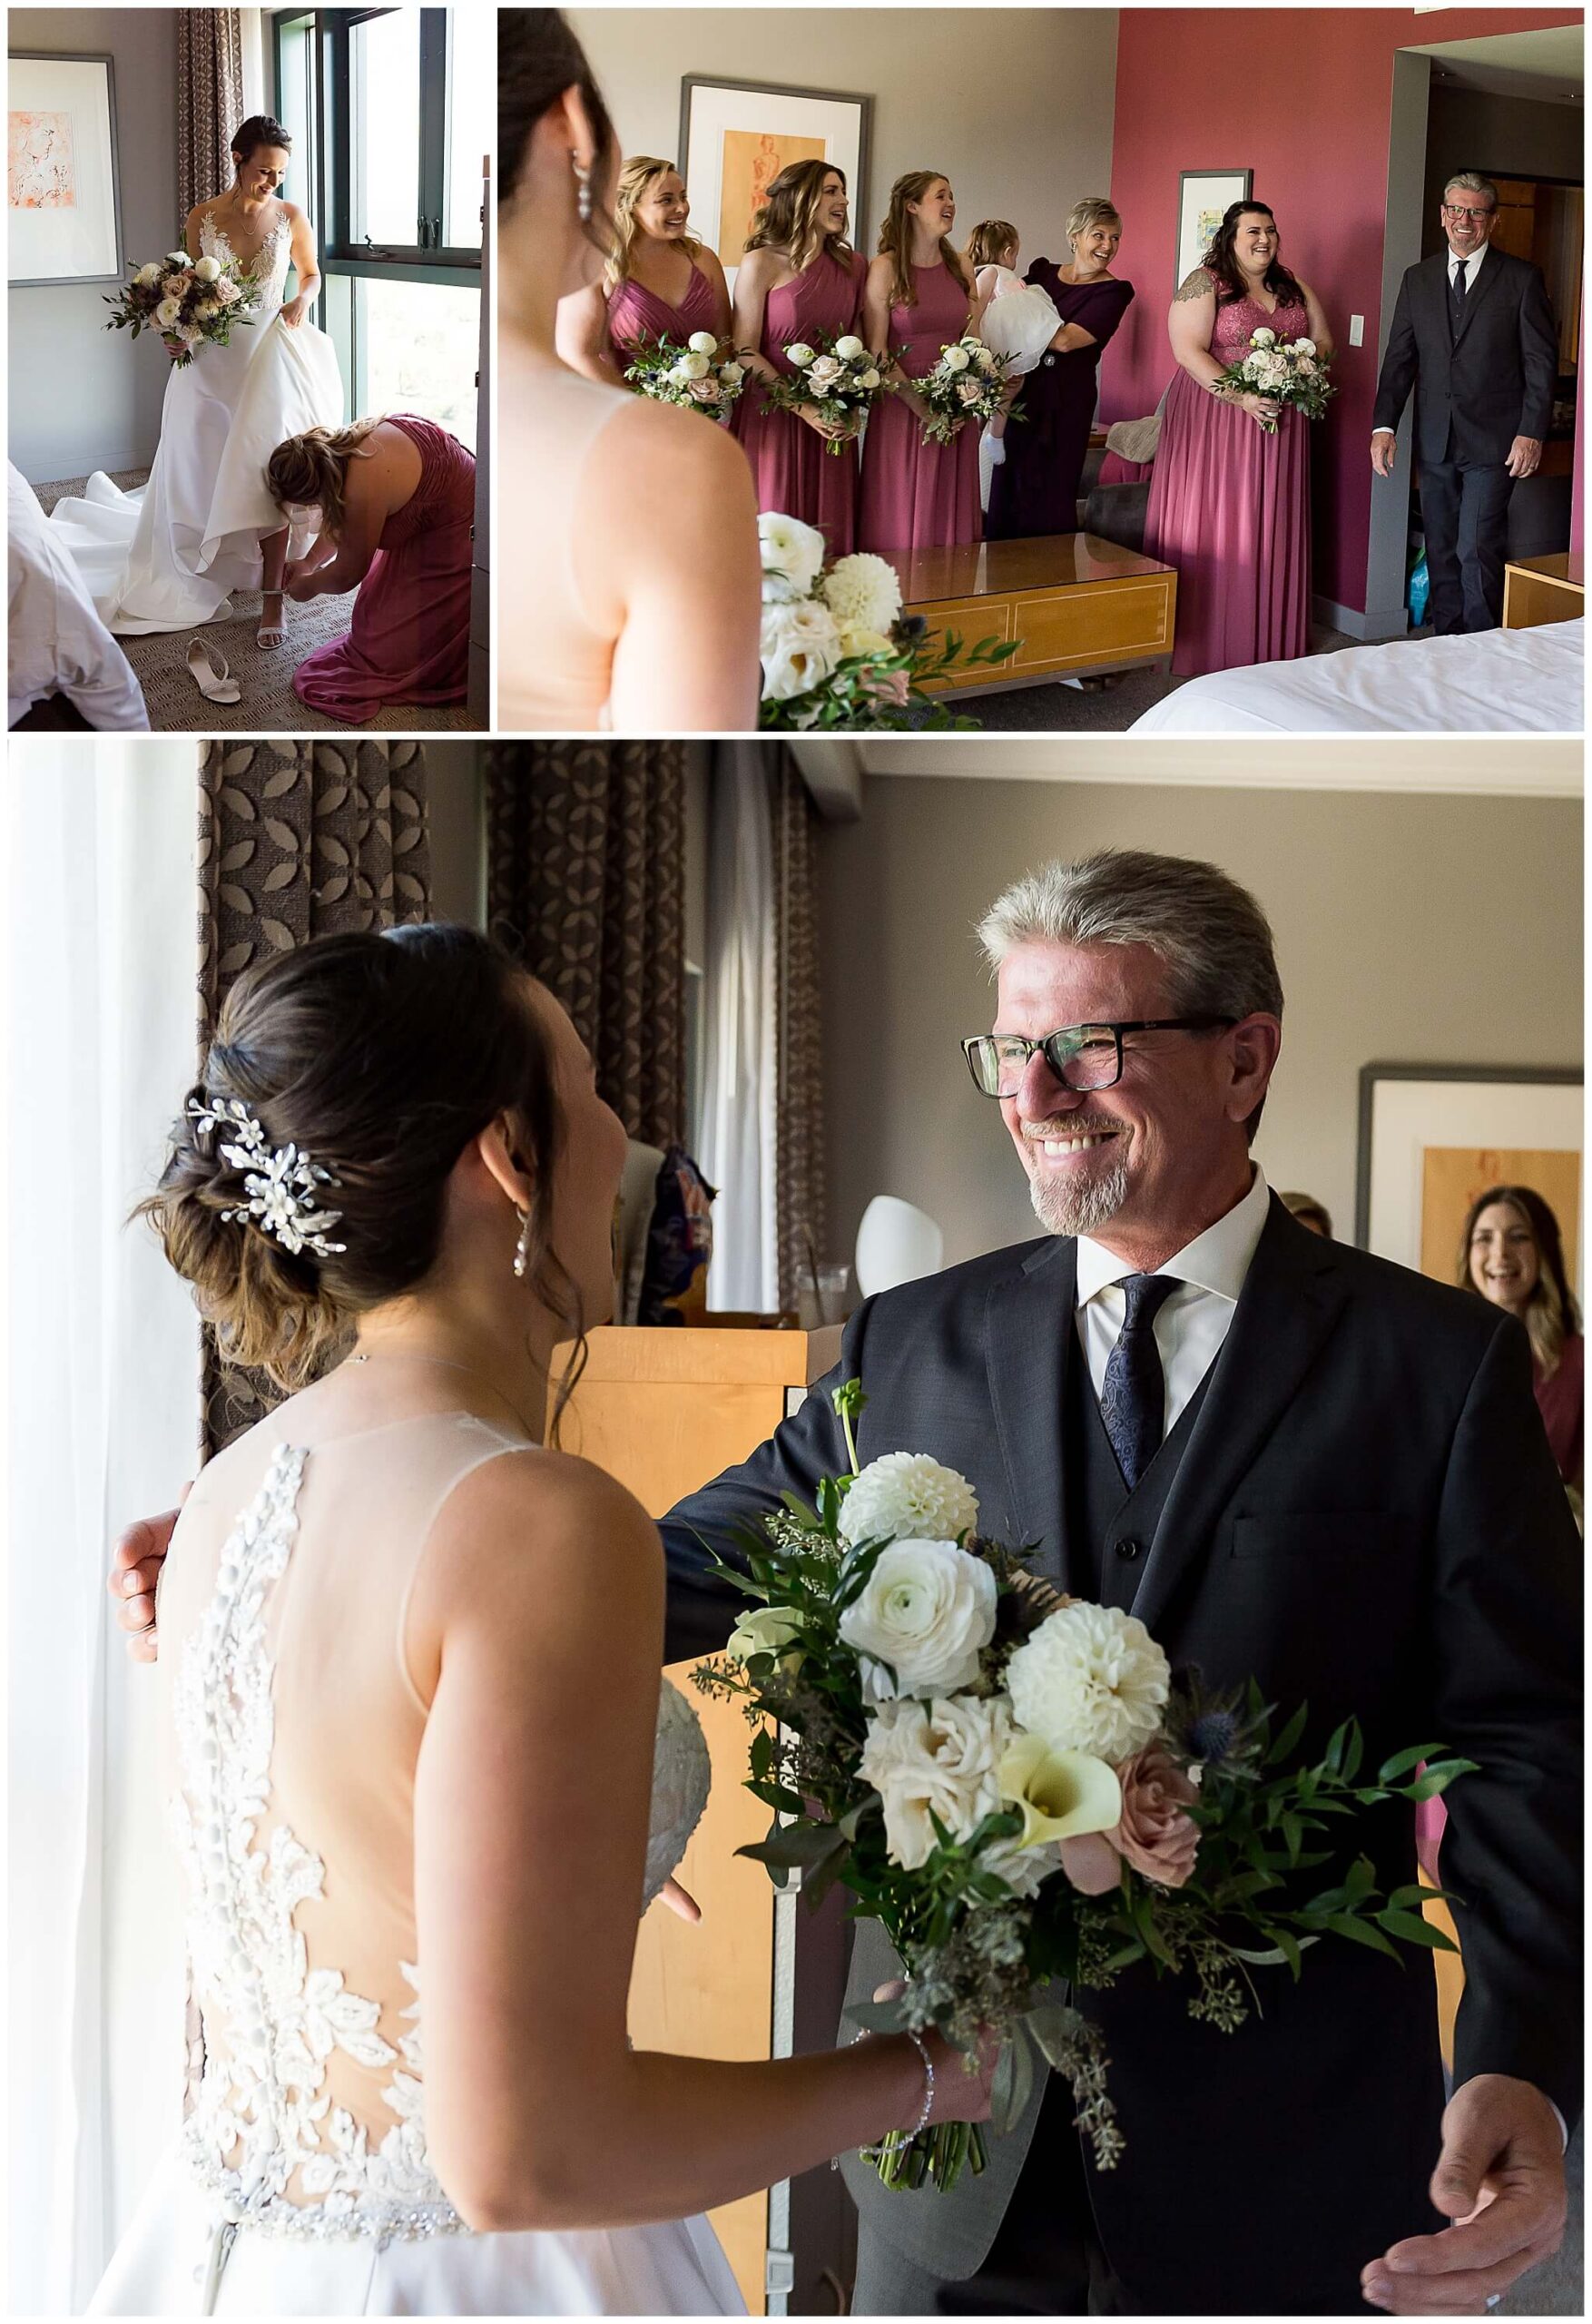 first looks between a bride and her father as she gets ready for her wedding at The Marshes wedding venue